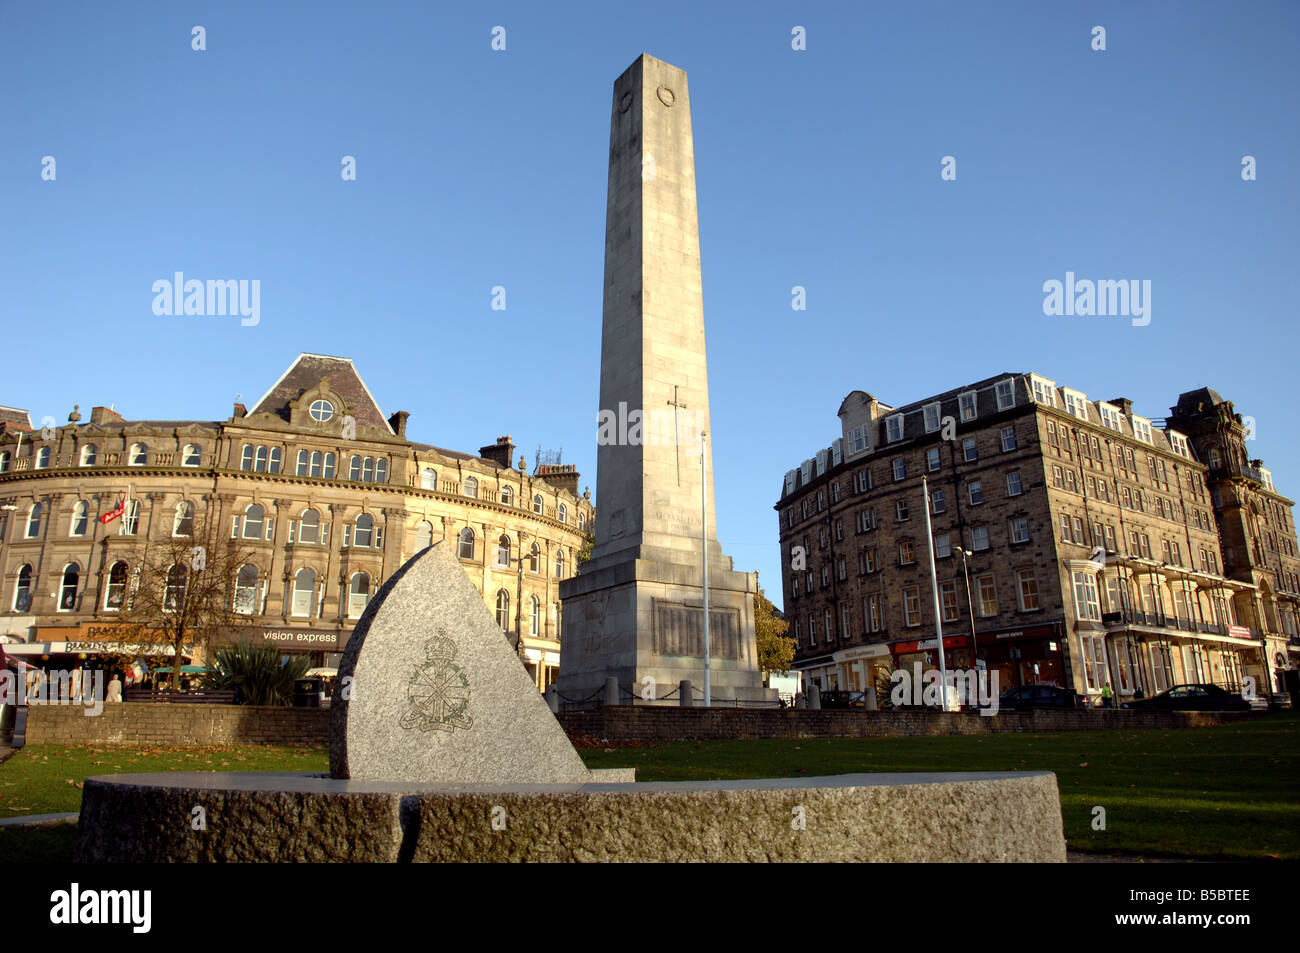 The war memorial at Harrogate in Yorkshire UK Photo by Simon Dack Stock Photo